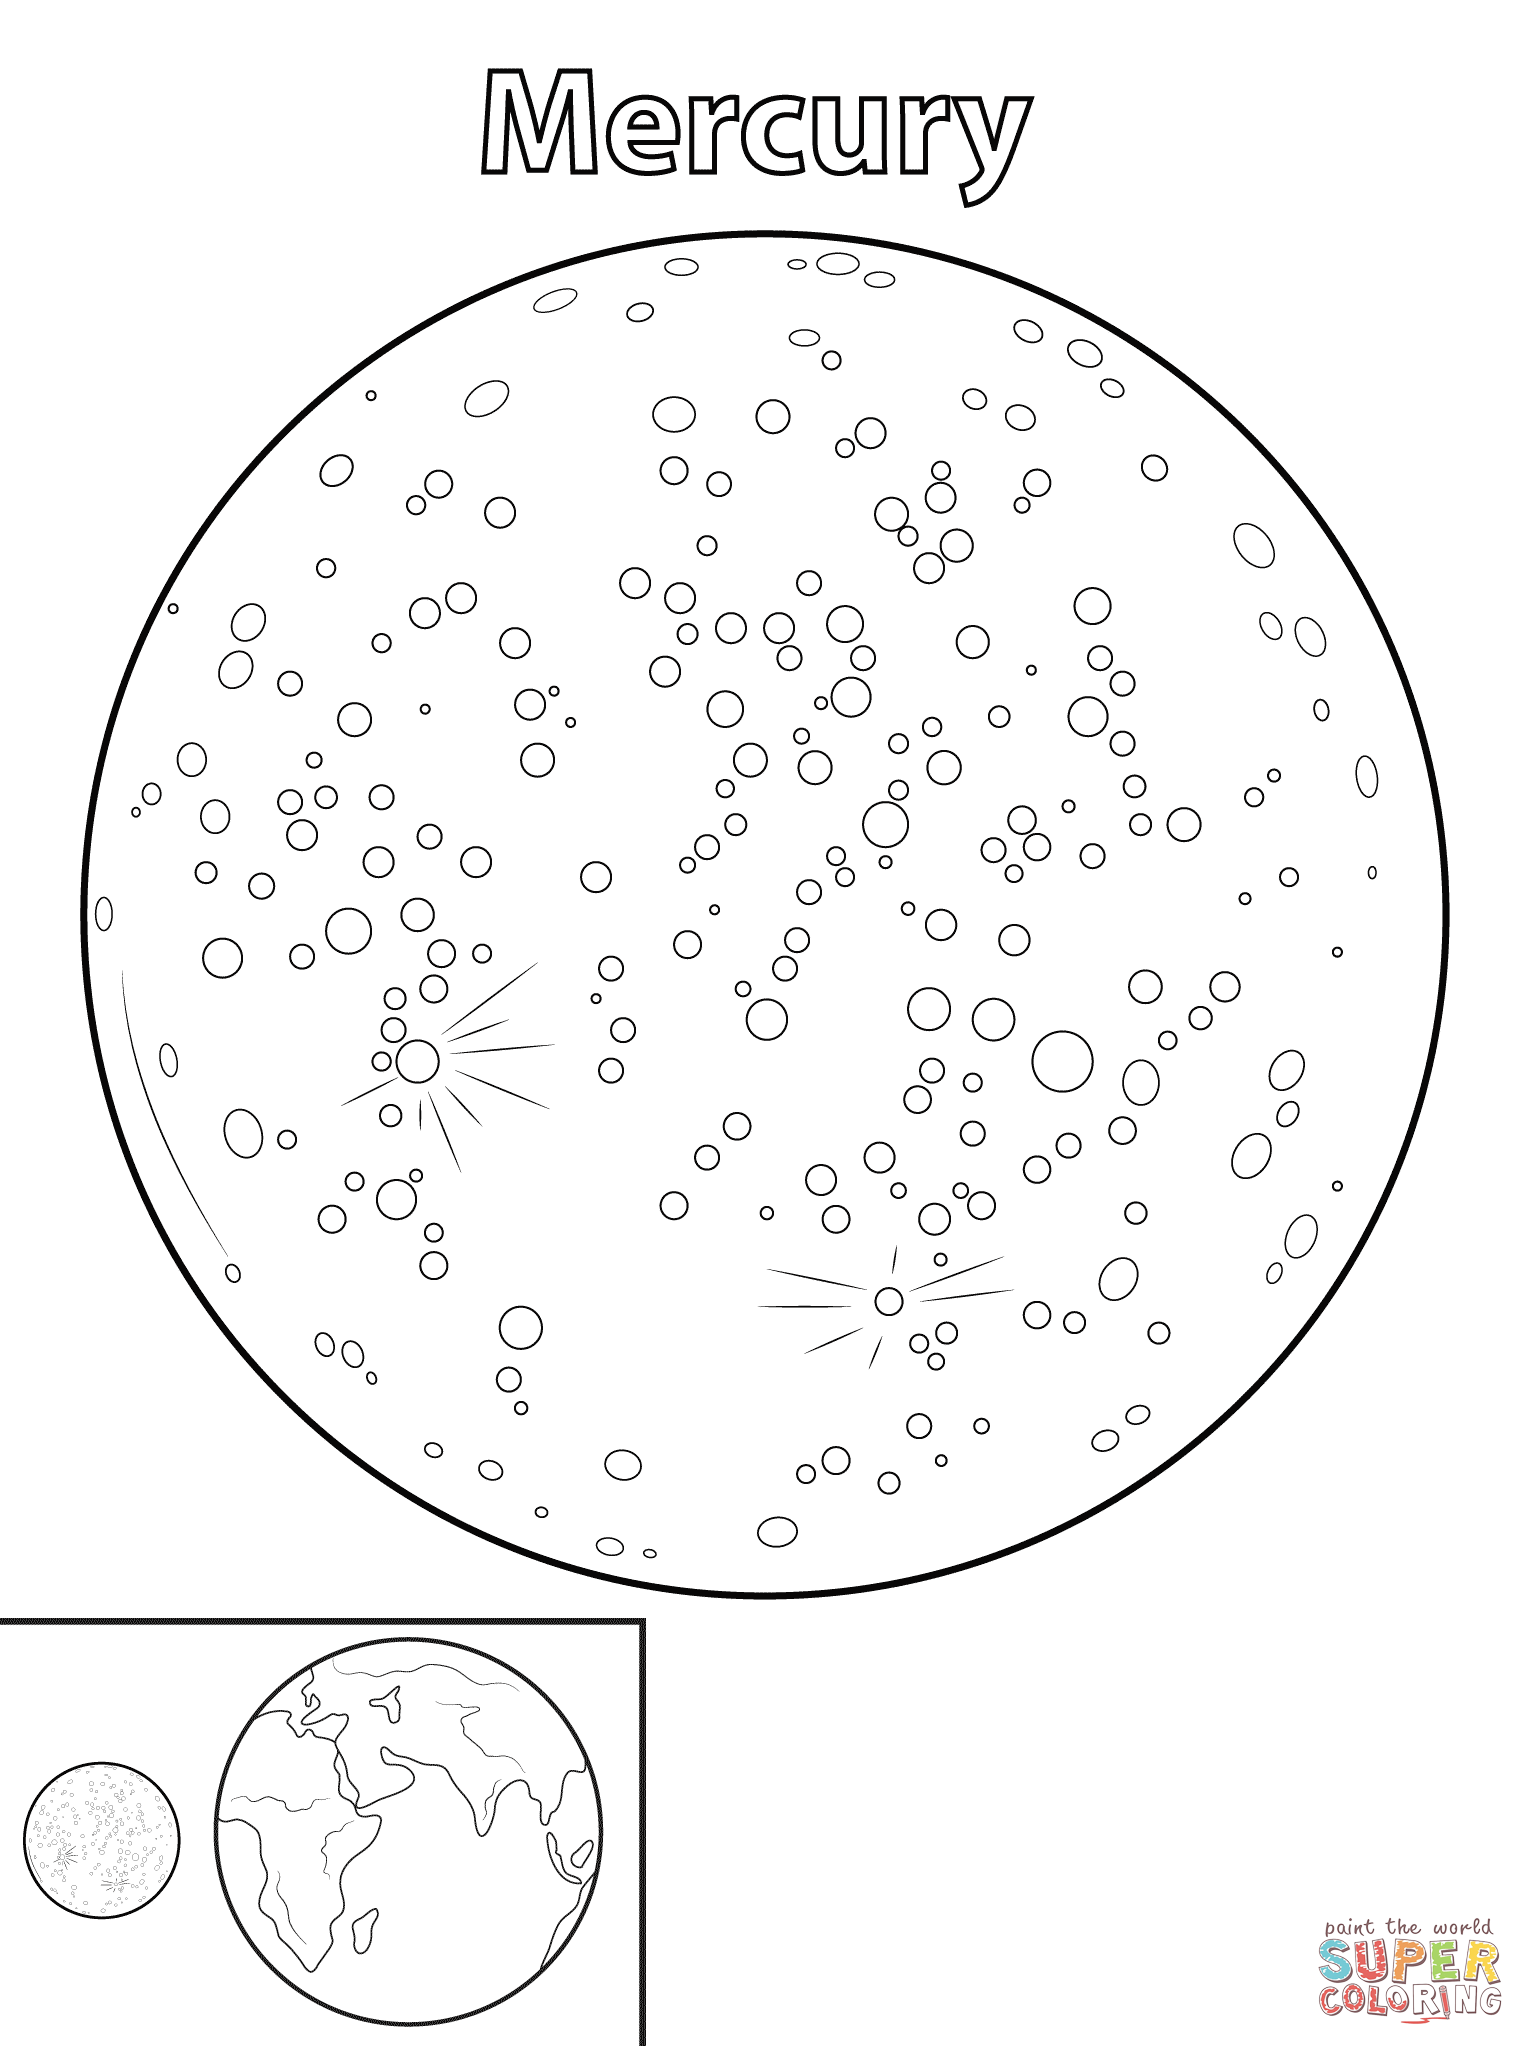 Mercury Planet coloring page | Free Printable Coloring Pages